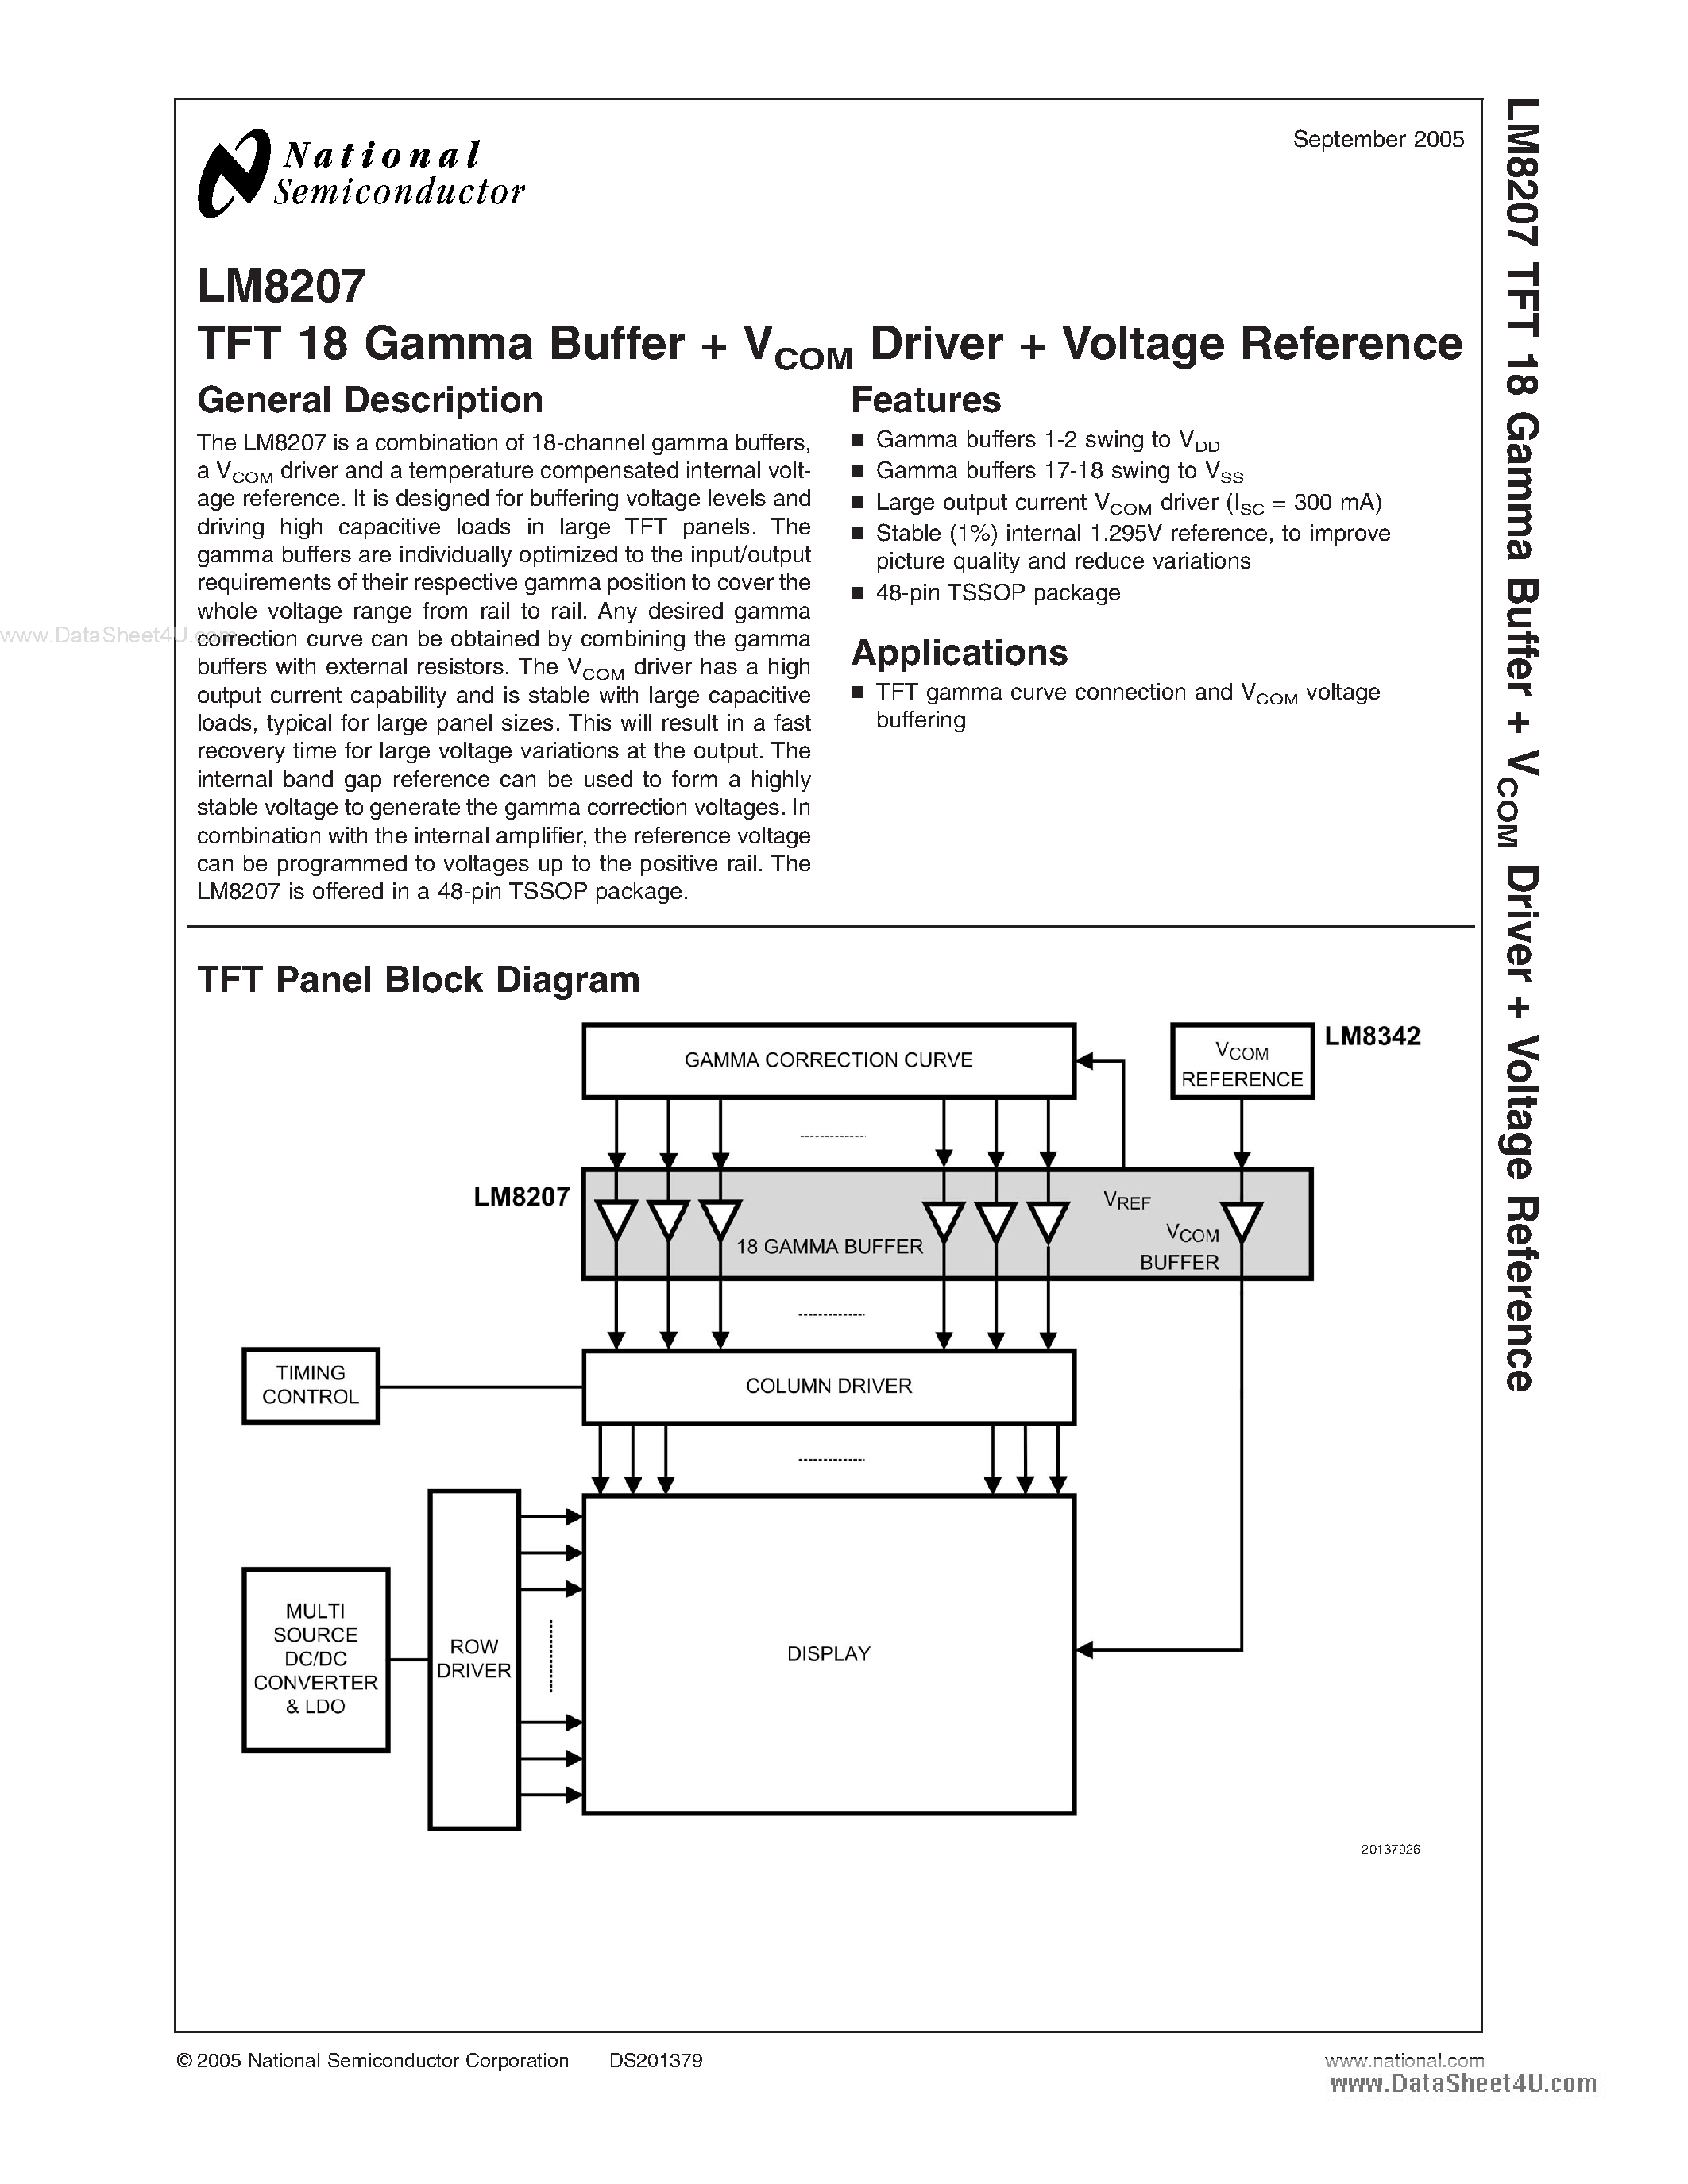 Datasheet LM8207 - TFT 18 Gamma Buffer VCOM Driver Voltage Reference page 1